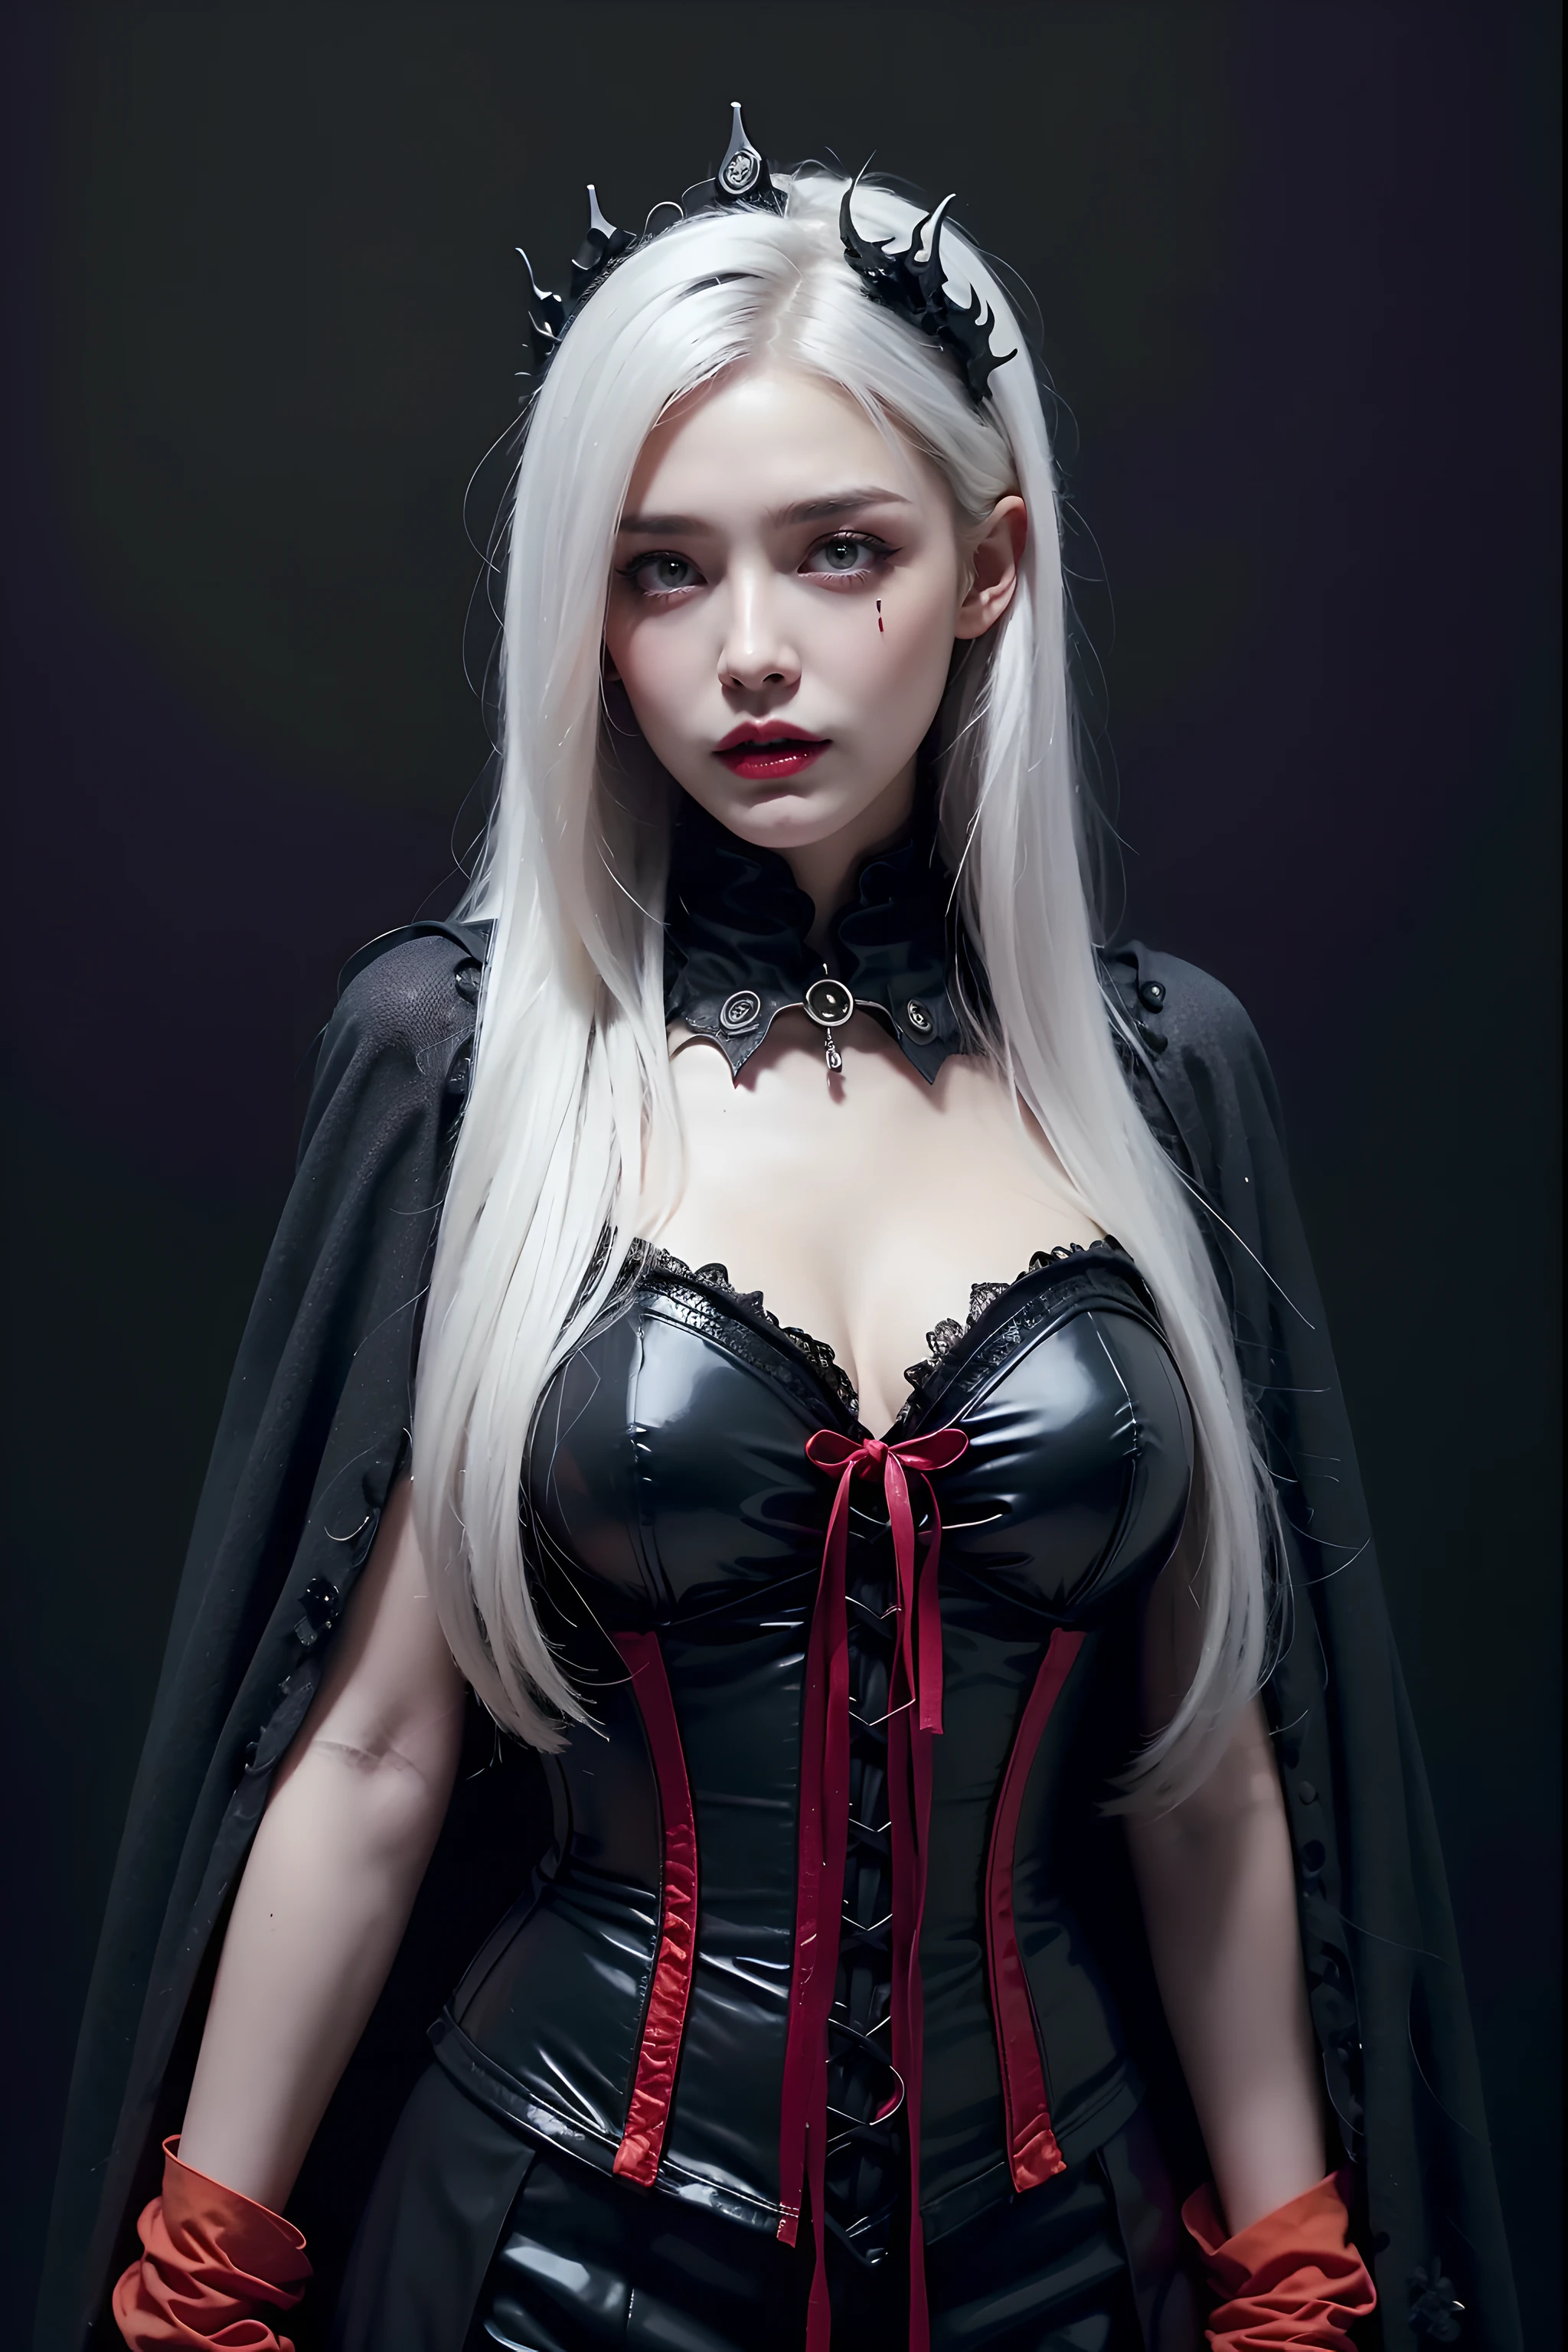 (Halloween theme:1.3), (fantasy:1.3), (vampire queen:1.3), (silver long hair:1.3), (red eyes:1.3), (vampire fangs:1.3), (extremely pretty and beautiful vampire queen:1.3), BREAK, Beautiful illustration, top-quality, (cute Russian vampire queen:1.3, Caucasian:1.3), having vampire features, (vampire queen:1.5), BREAK, (red eyes:1.5, pale skin:1.1), (beautiful, 20 years old:1.5), slim, slender, (big sagging breasts), (clean face:1.3), (vampire fangs:1.3), (ash hair:1.3), (white hair:1.3), (silver hair:1.3), BREAK, (fusion of red medieval cape dress and black elegant full lacy gothic dress), (latex corset), (black latex stockings), (knee-high-over-boots, pin-hells), (insanely detailed clothes), (halloween costume), BREAK, ((arms down:1.5)), blue eyess, lovely thighs, (jack o'lantern:1.3), (looking straight at the viewer), (view viewer:1.3), (upper body:1.3), top angle, simple black background, (((dark background:1.5))), (halloween:1.5), (halloween background:1.5), (low-key lighting, (moody ambiance):1.2, dark shadows, subtle highlights, mysterious aura),